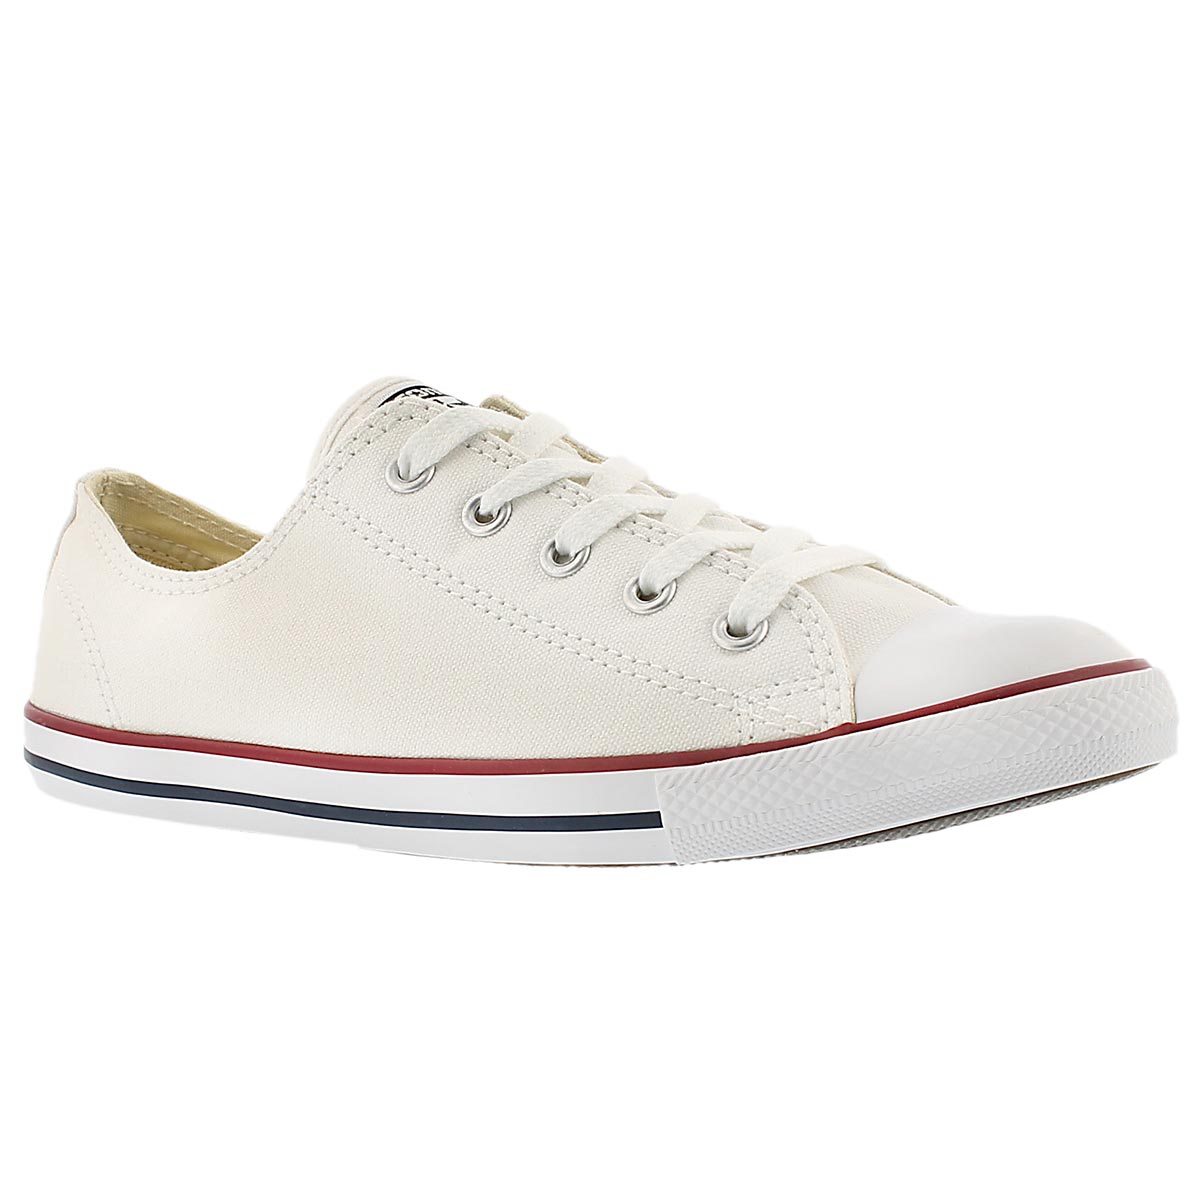 converse dainty true to size